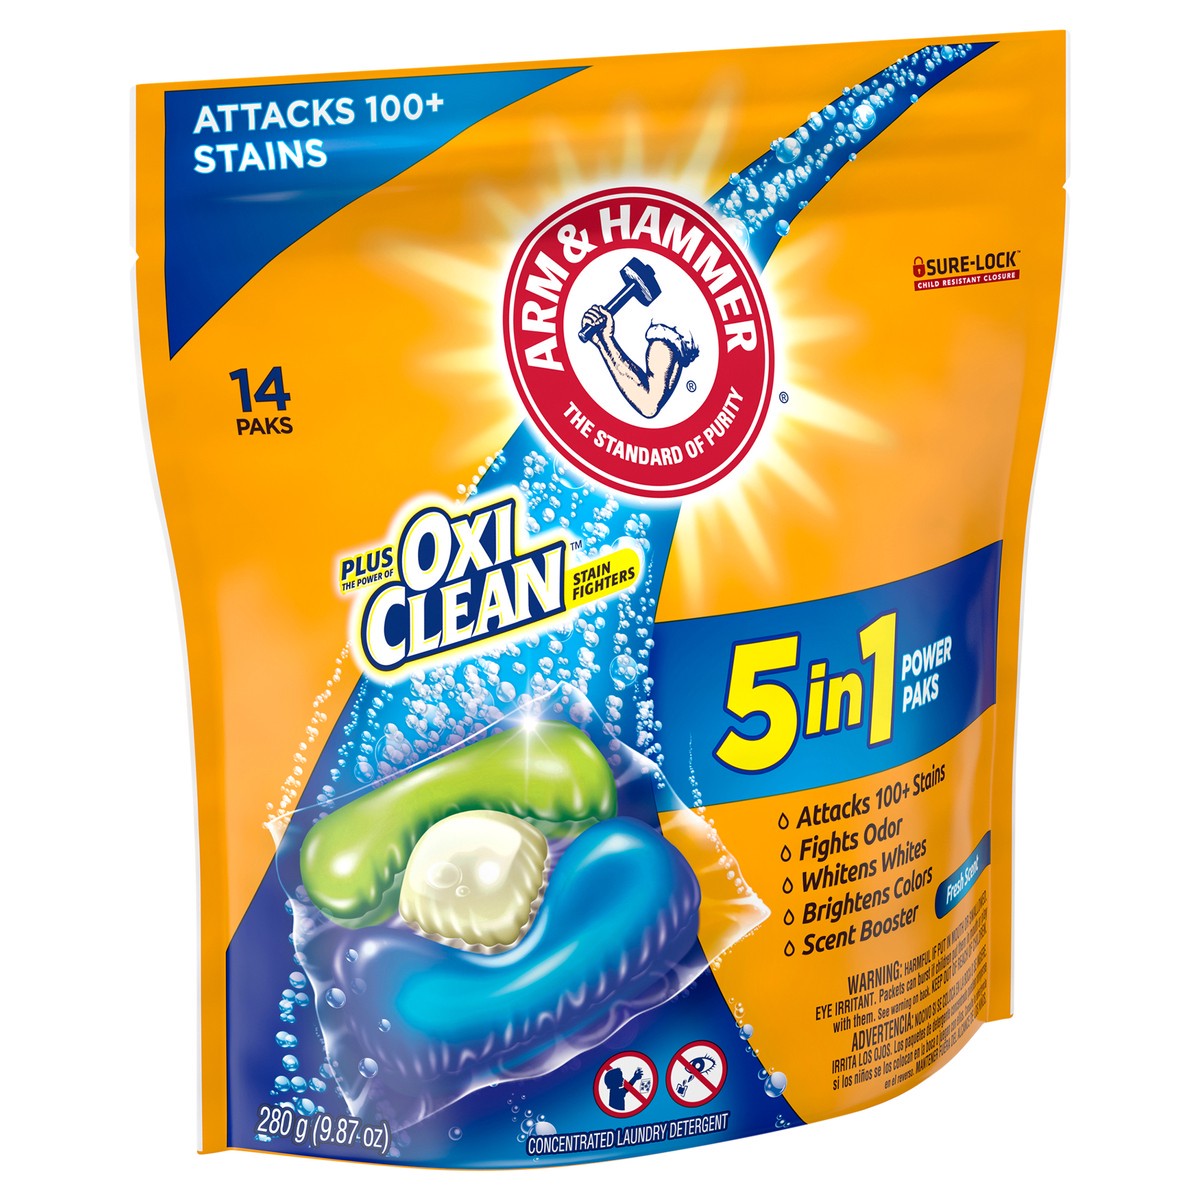 slide 7 of 8, ARM & HAMMER plus OxiClean 5-in-1 Power Paks, 14 Count, 9.87 oz